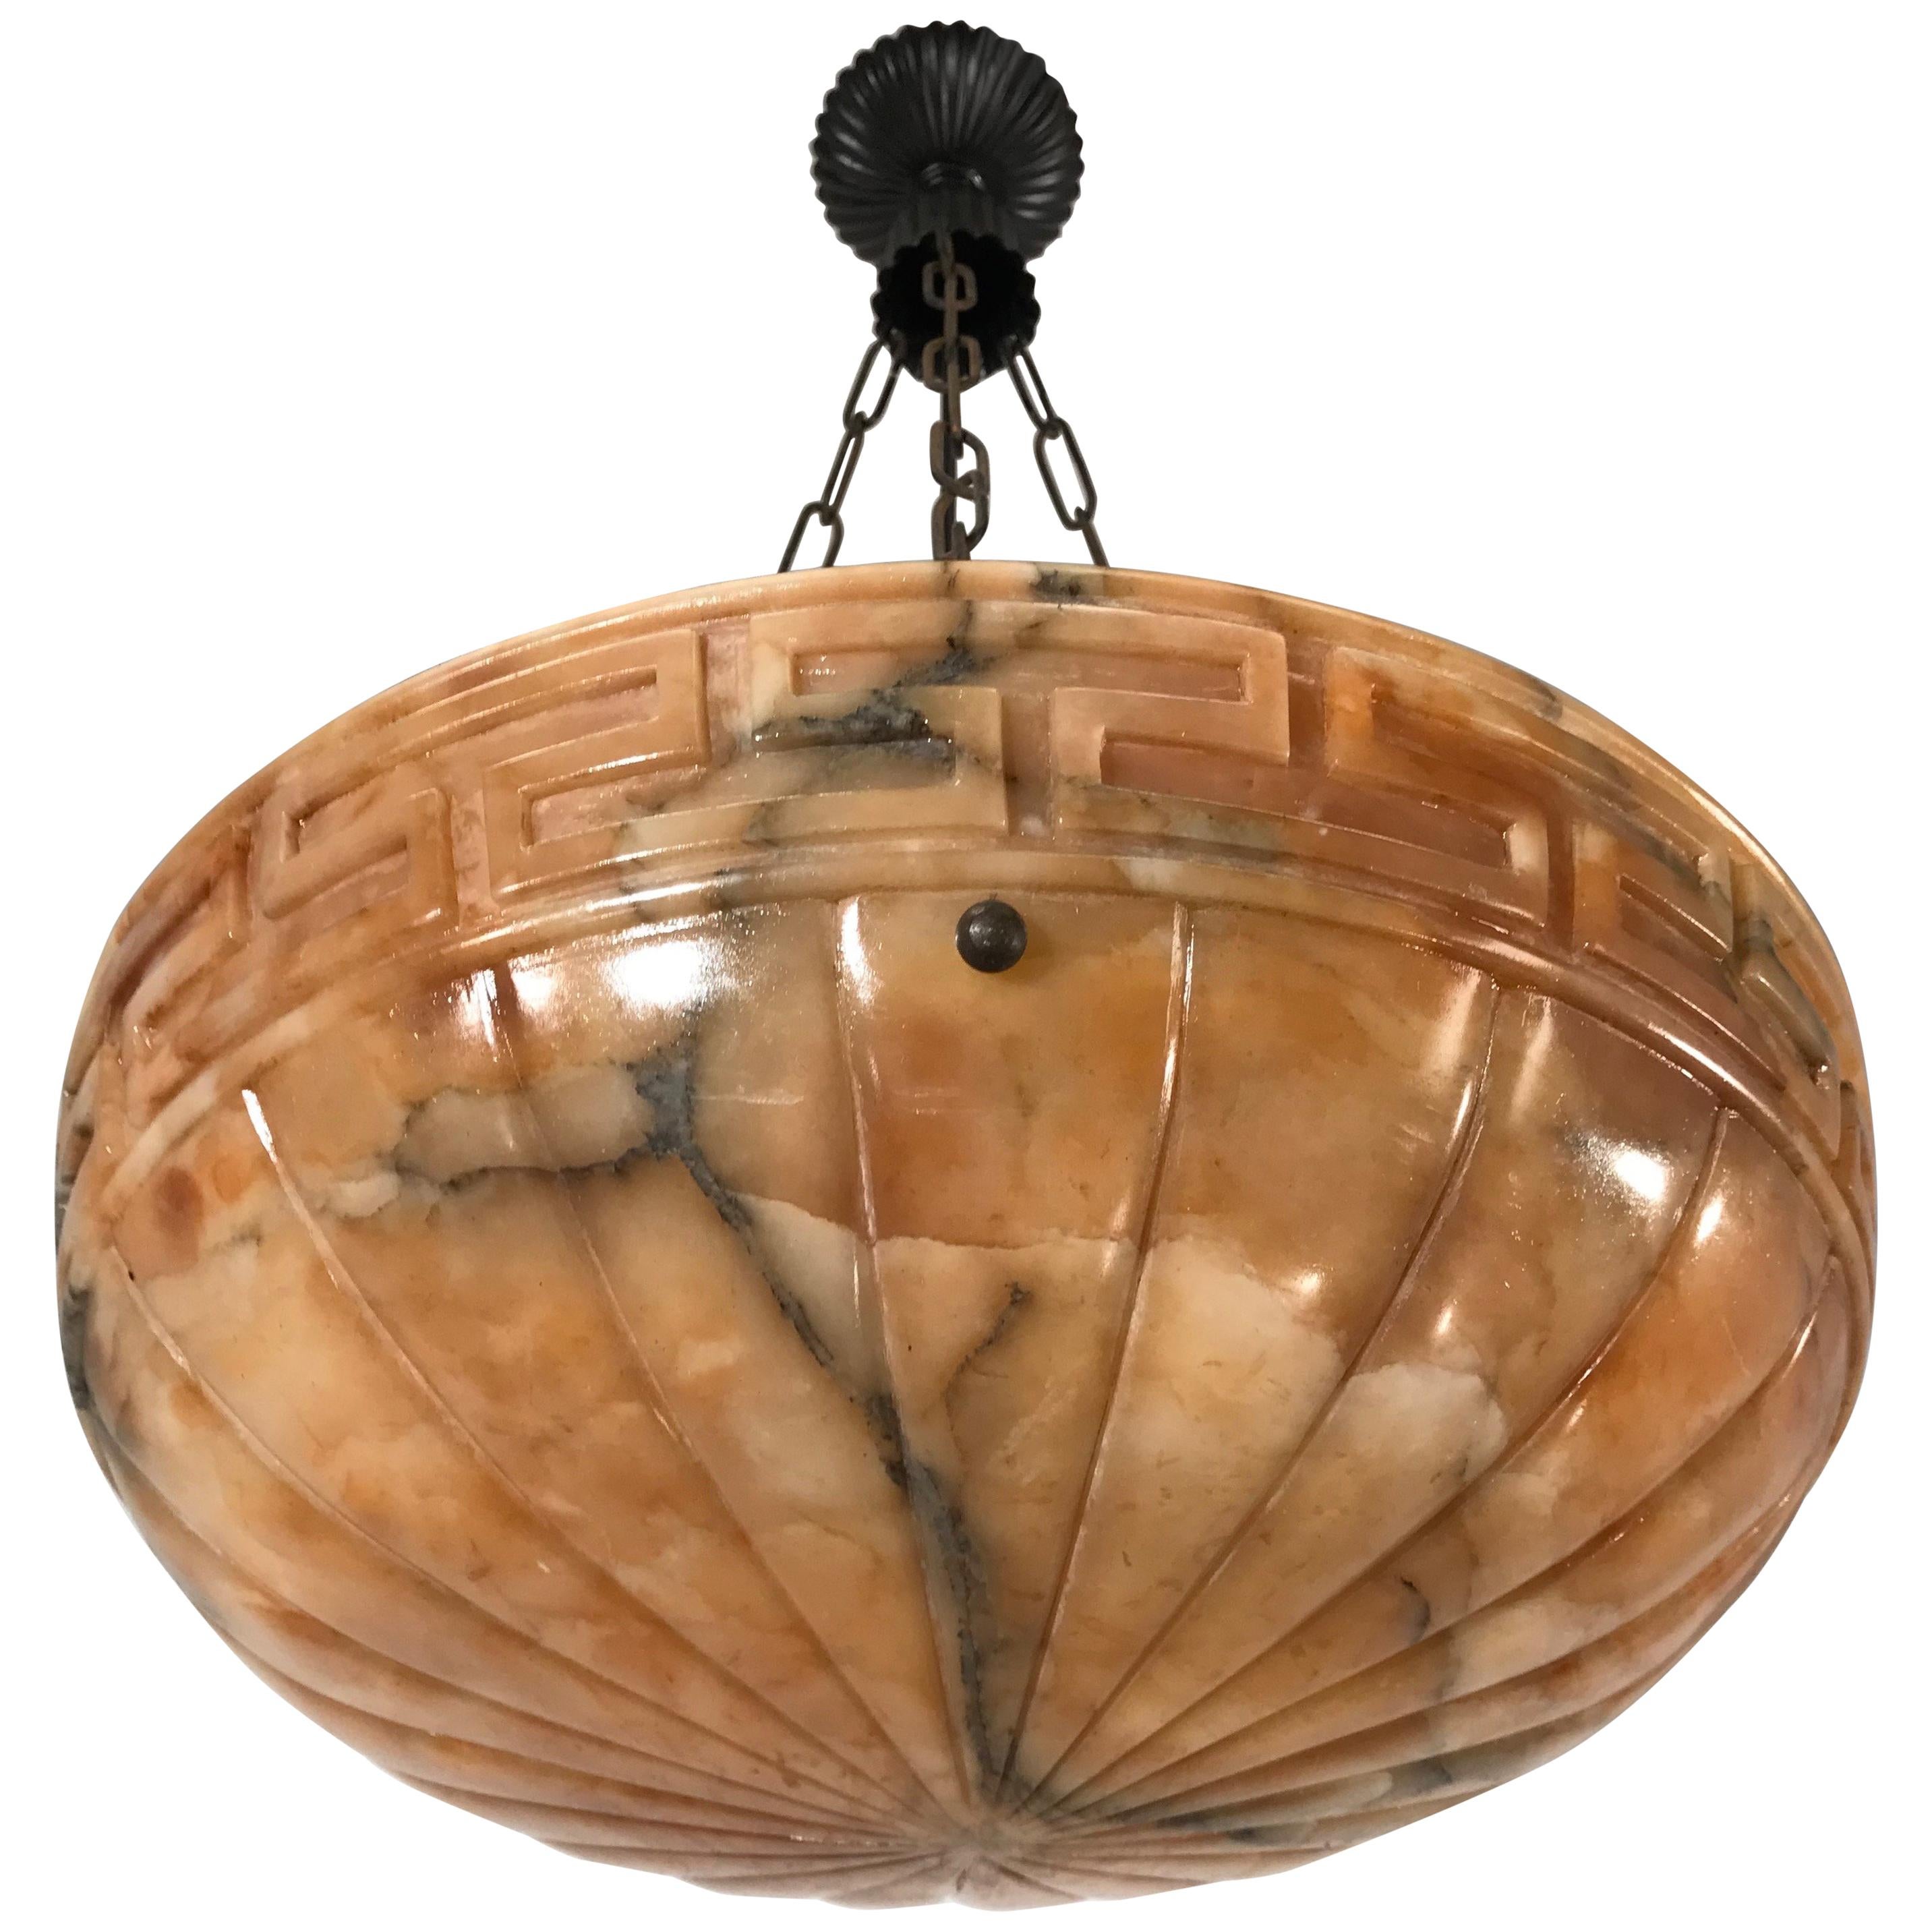 Good Size Neoclassical Early 1900s Alabaster Pendant Light Fixture / Chandelier